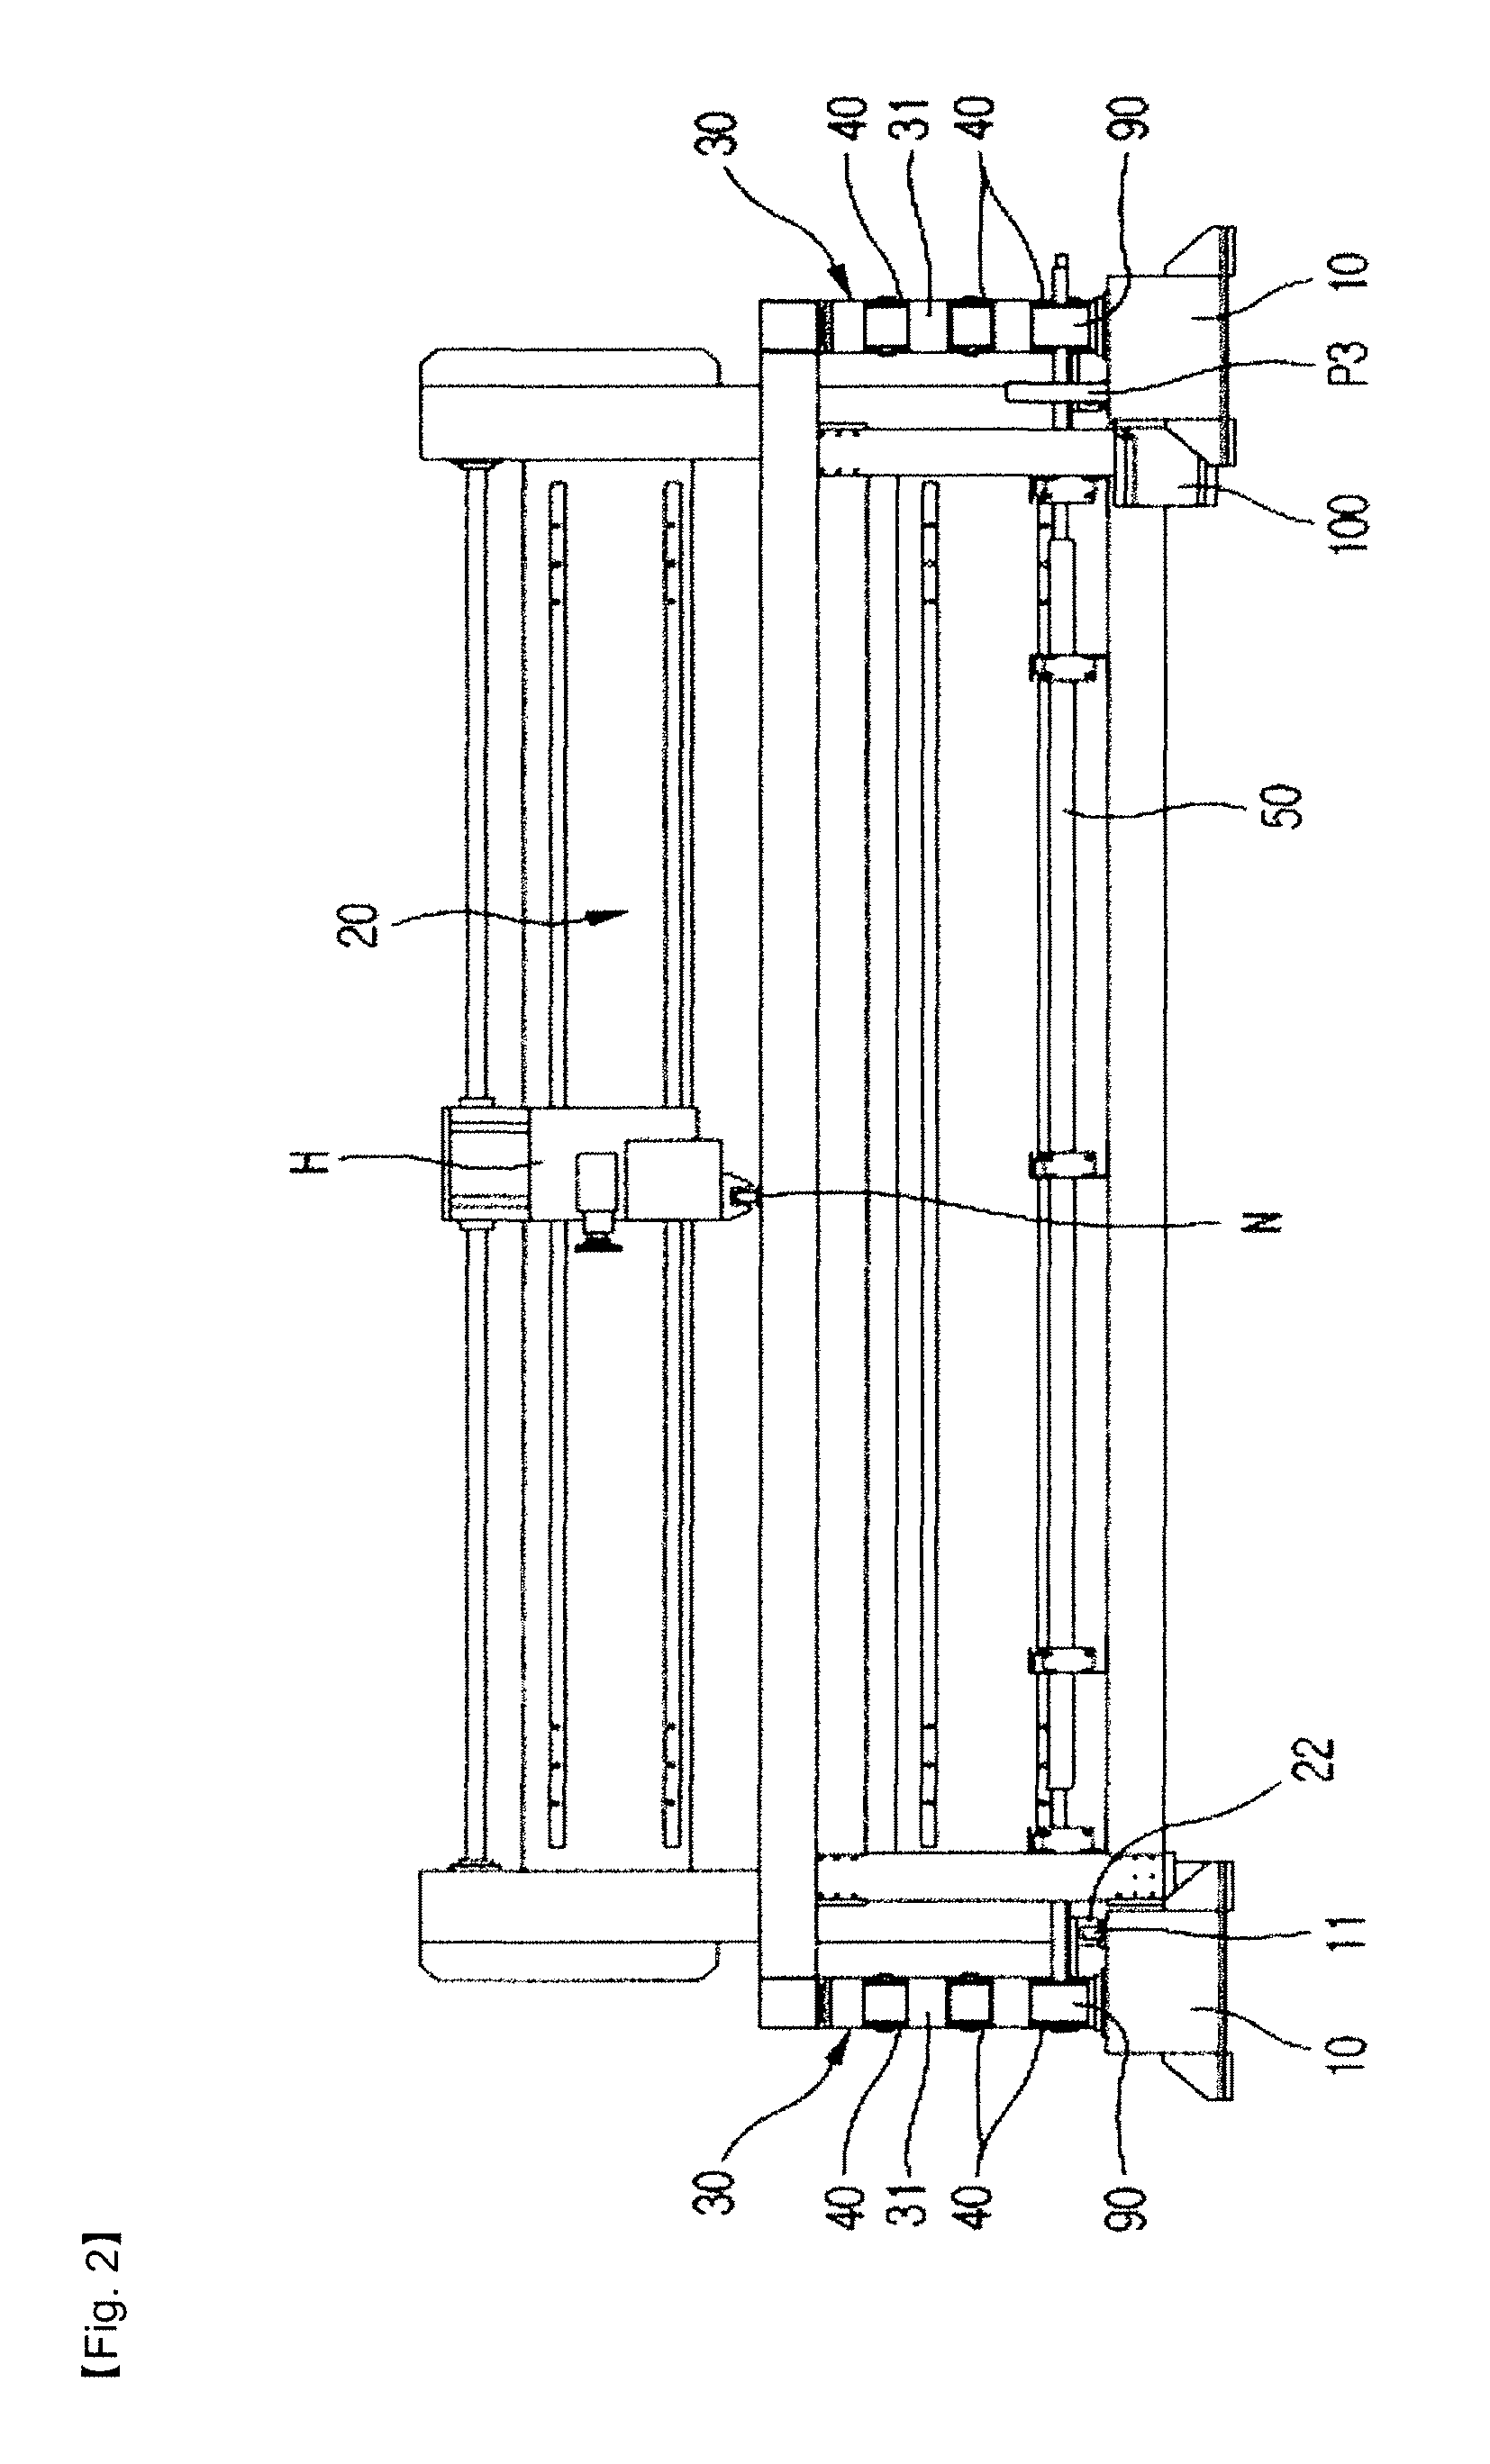 Apparatus for forward and backward movement of sewing machine